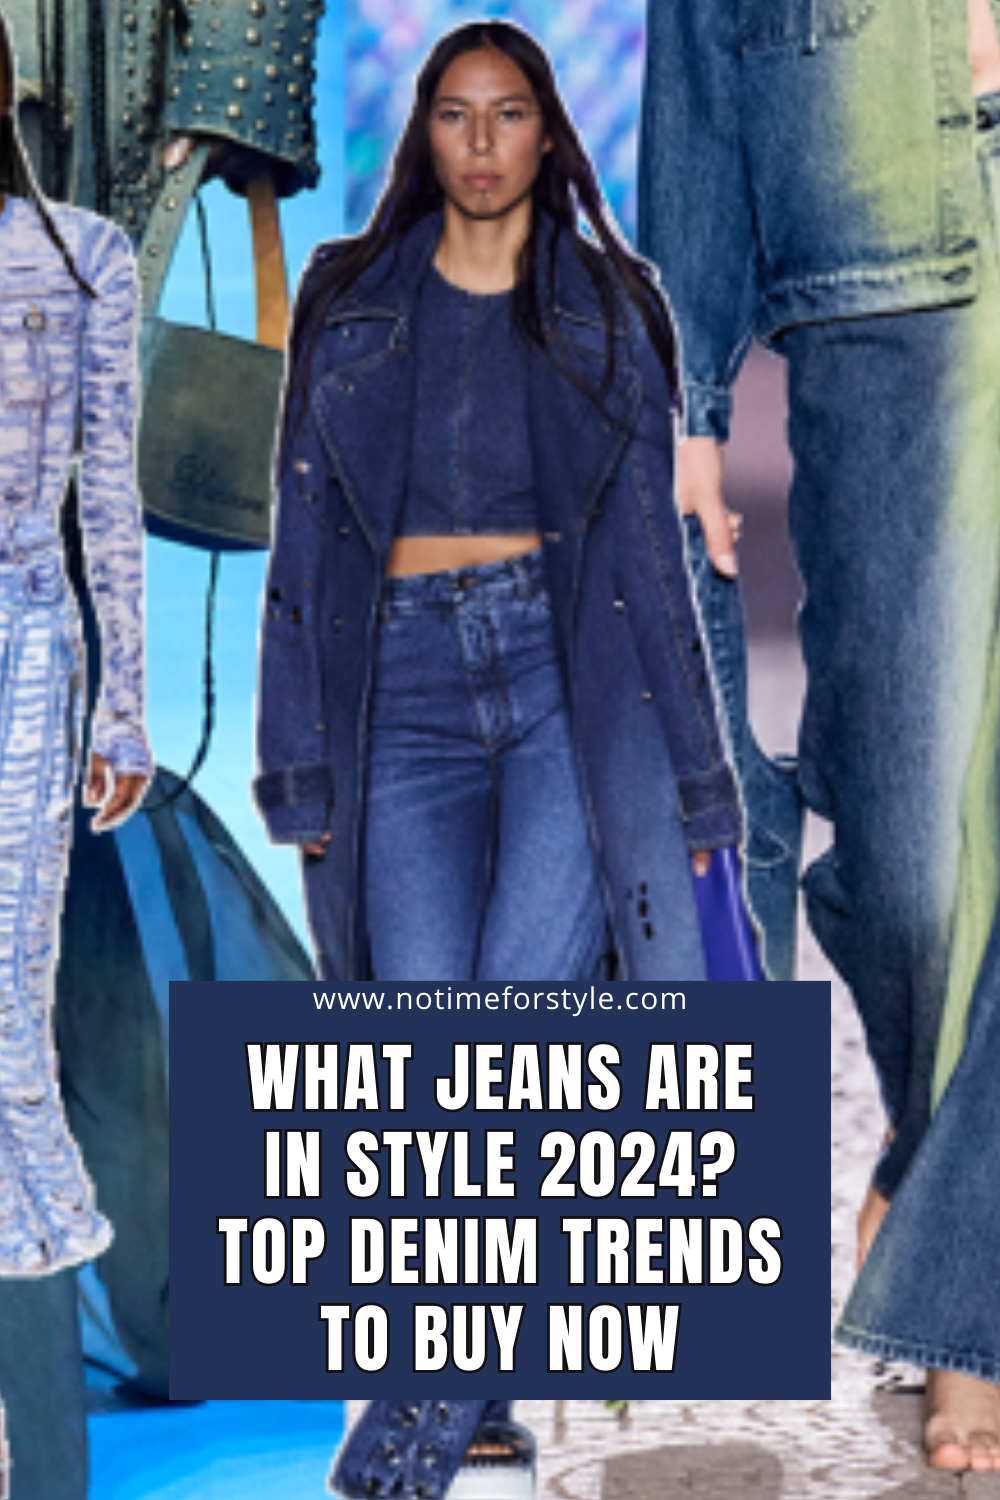 7 Jeans Outfits That Will Make Your Denim Look Peak 2024